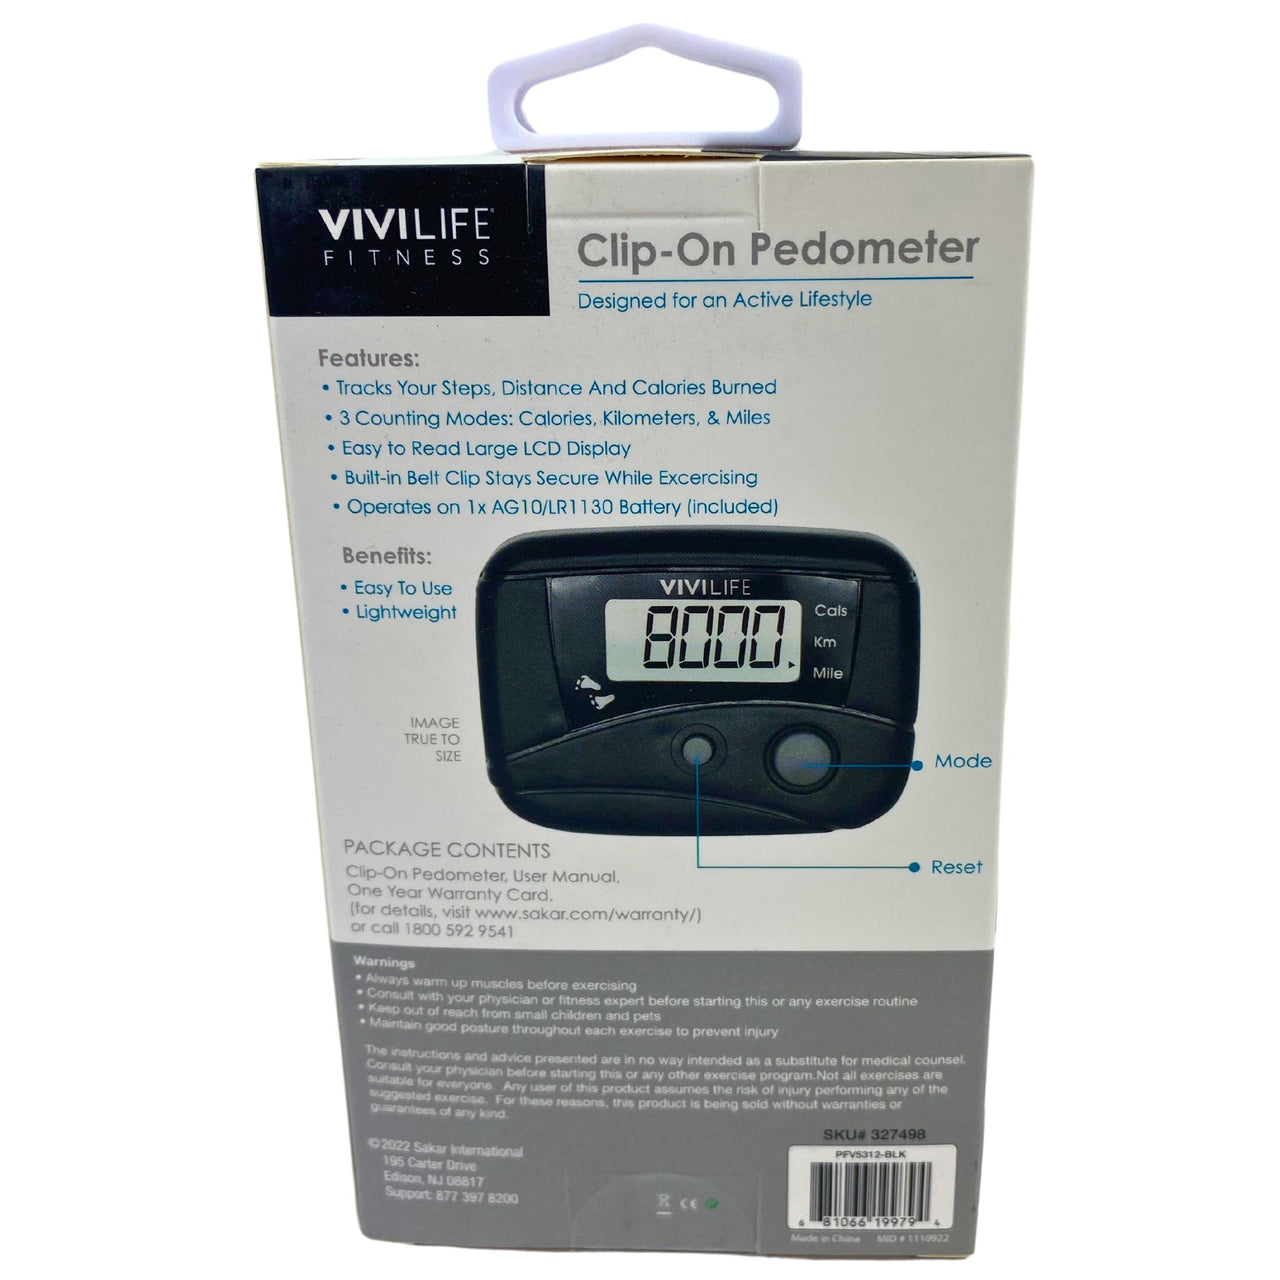 ViviLife Fitness Clip On Pedometer Designed for an Active Lifestyle